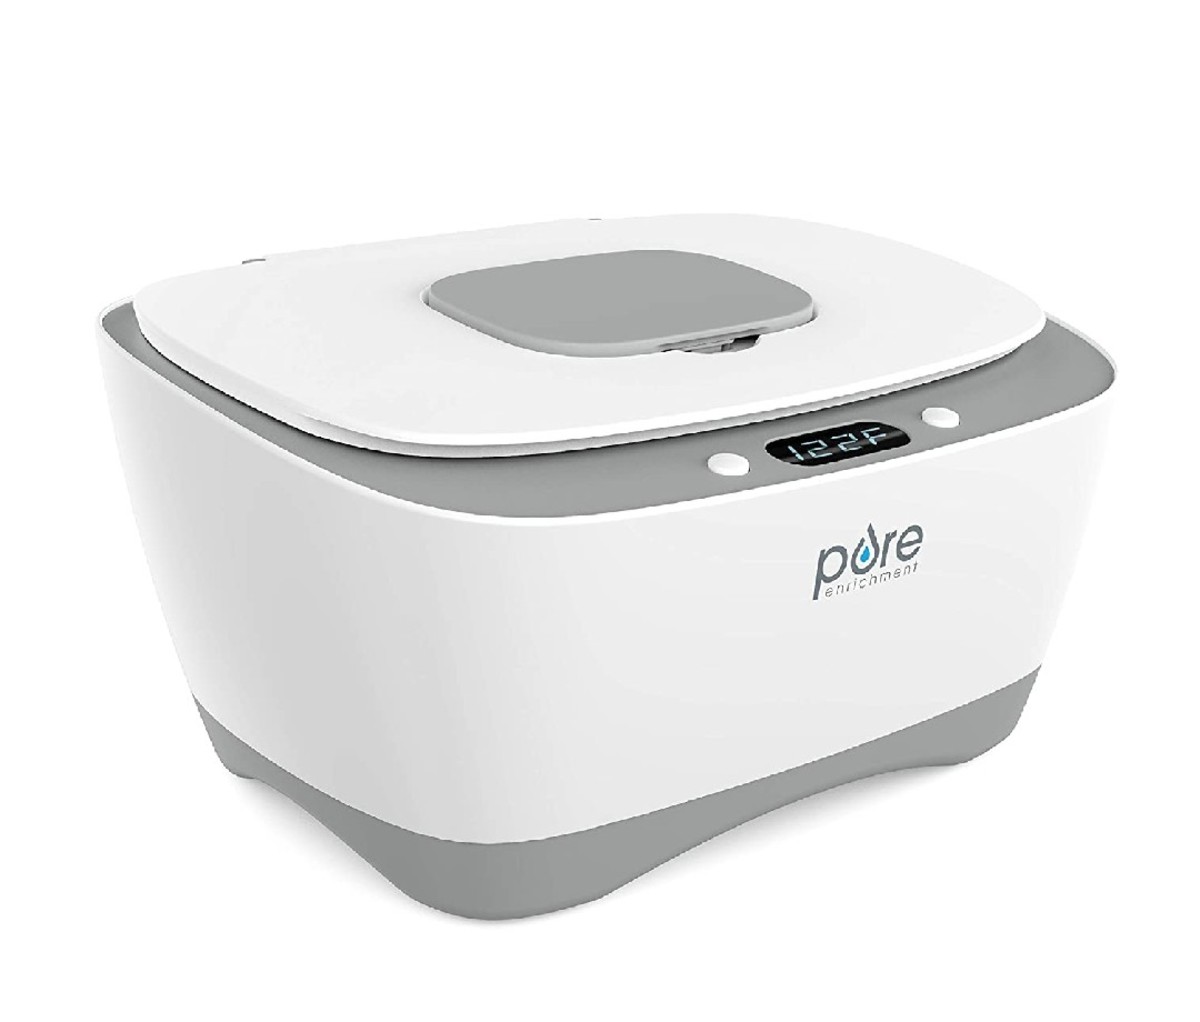 PureBaby Wipe Warmer with Digital Display: Best Gifts for New Dads